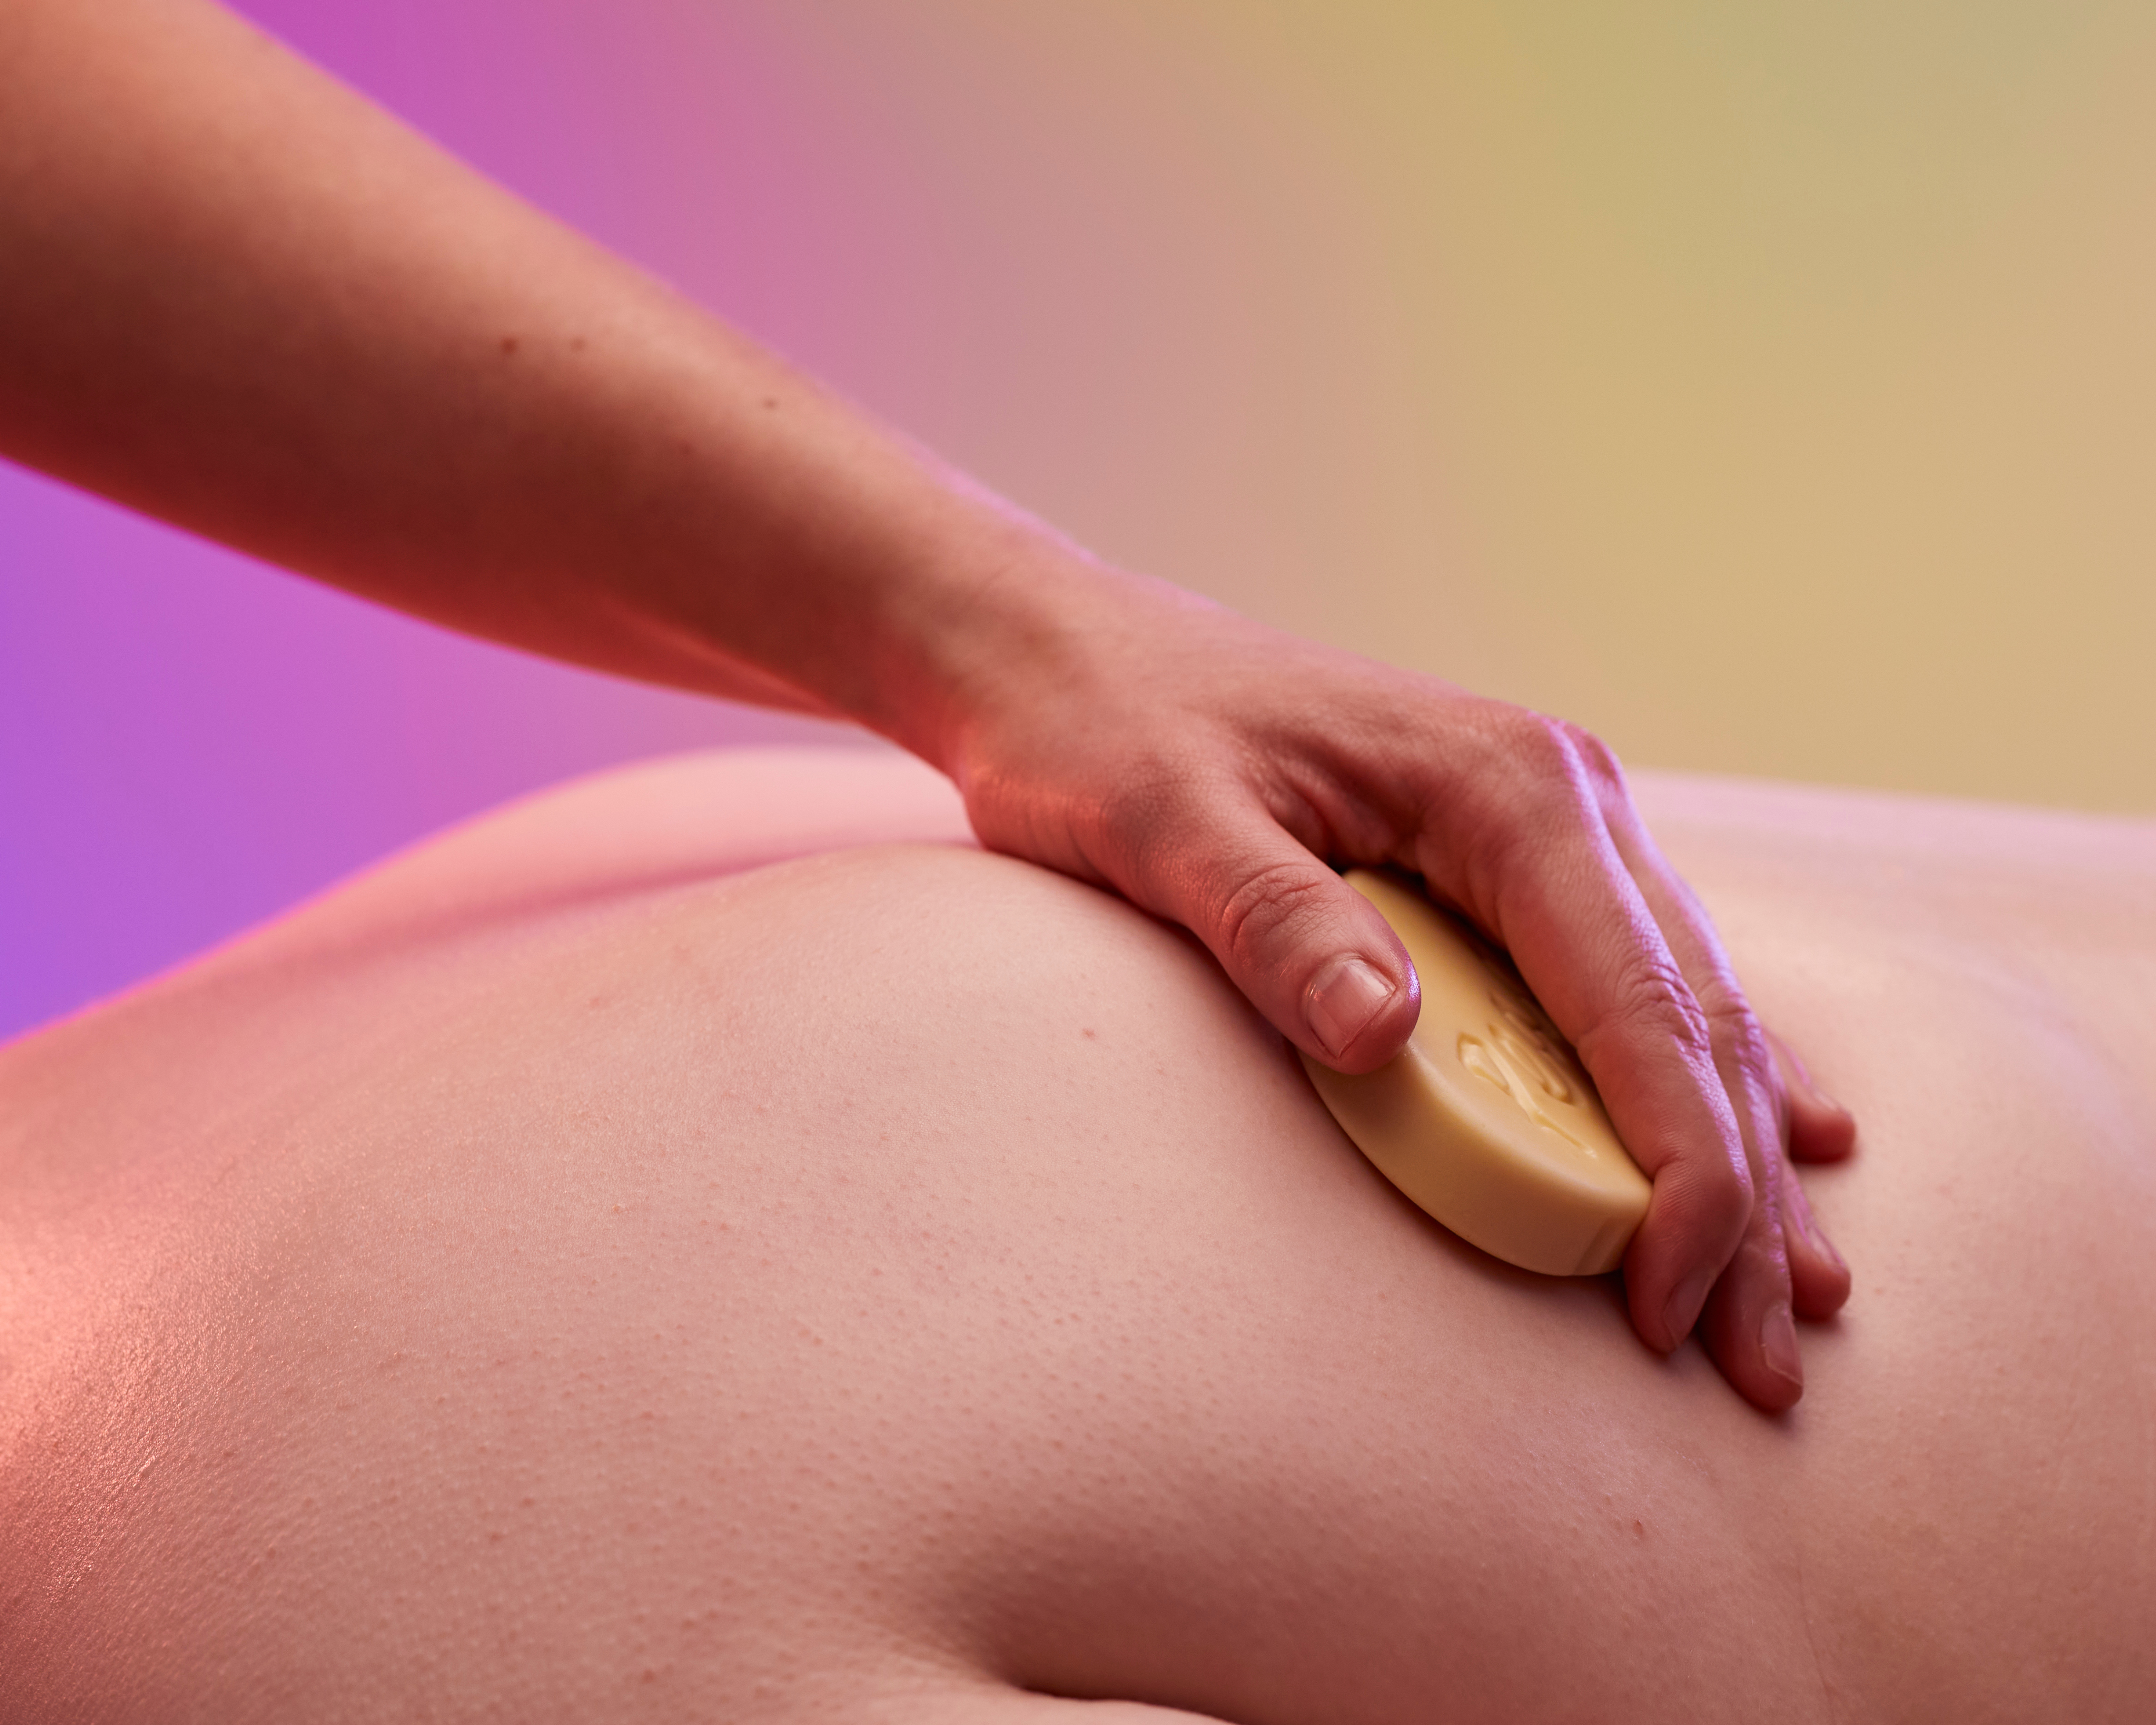 Girl getting a massage on a pink and yellow background